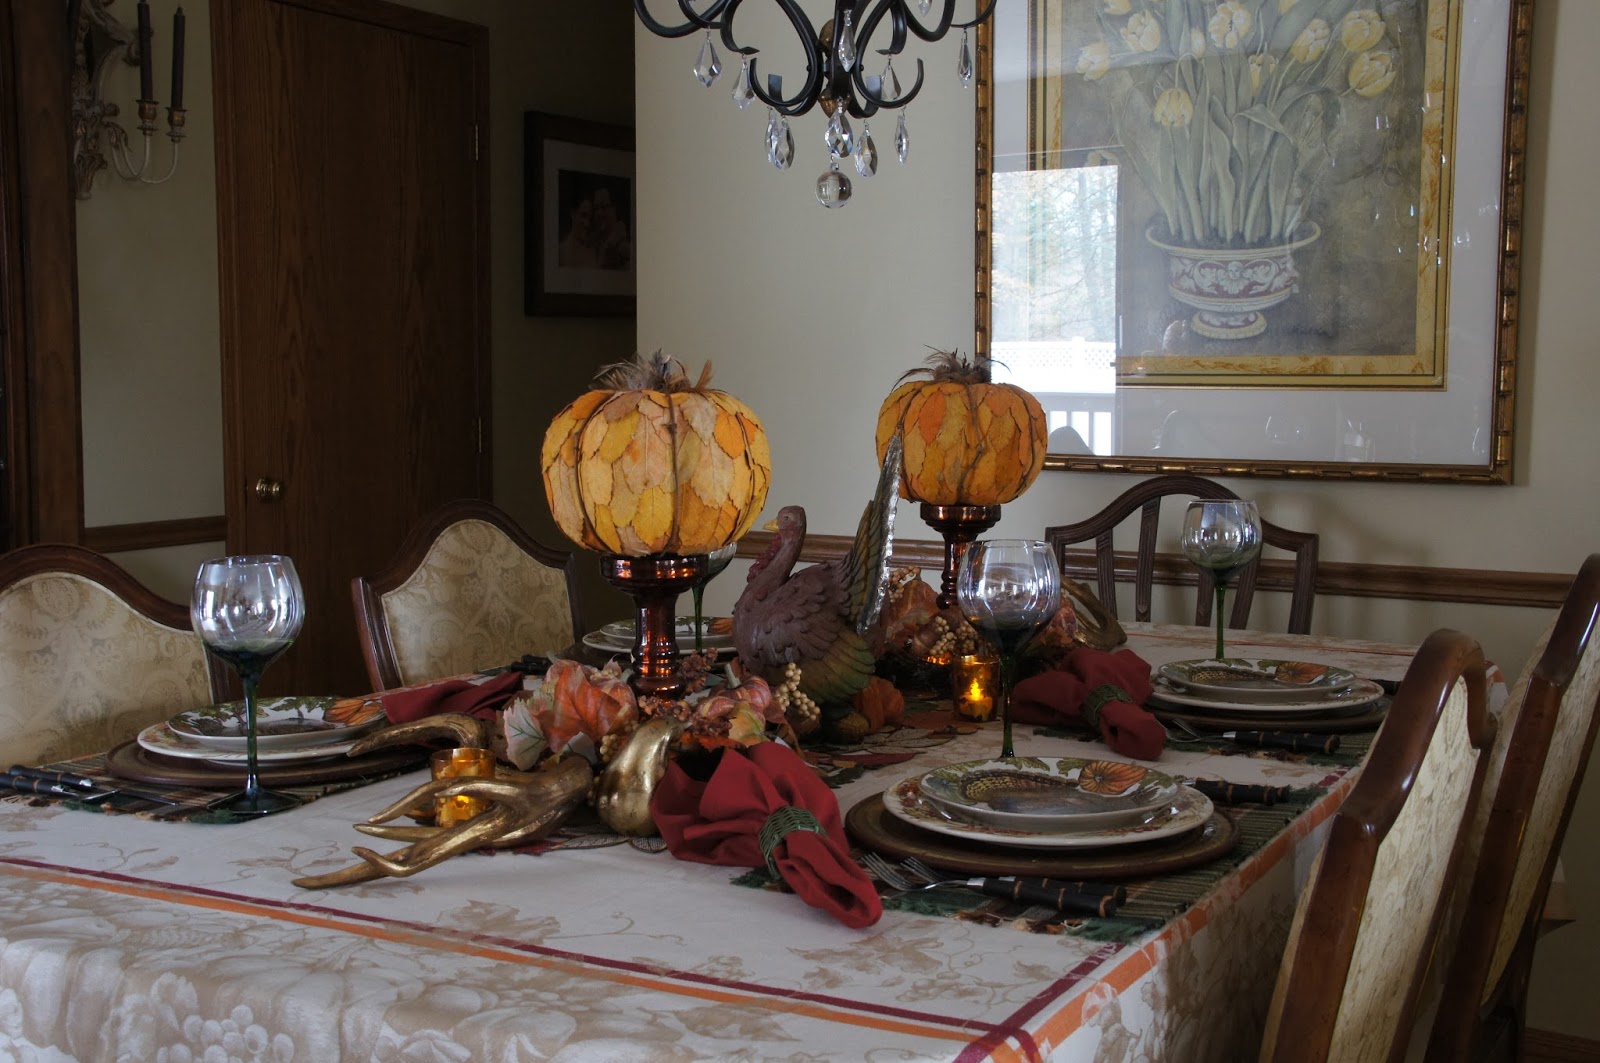 Home and Gardening With Liz: Dining for Thanksgiving